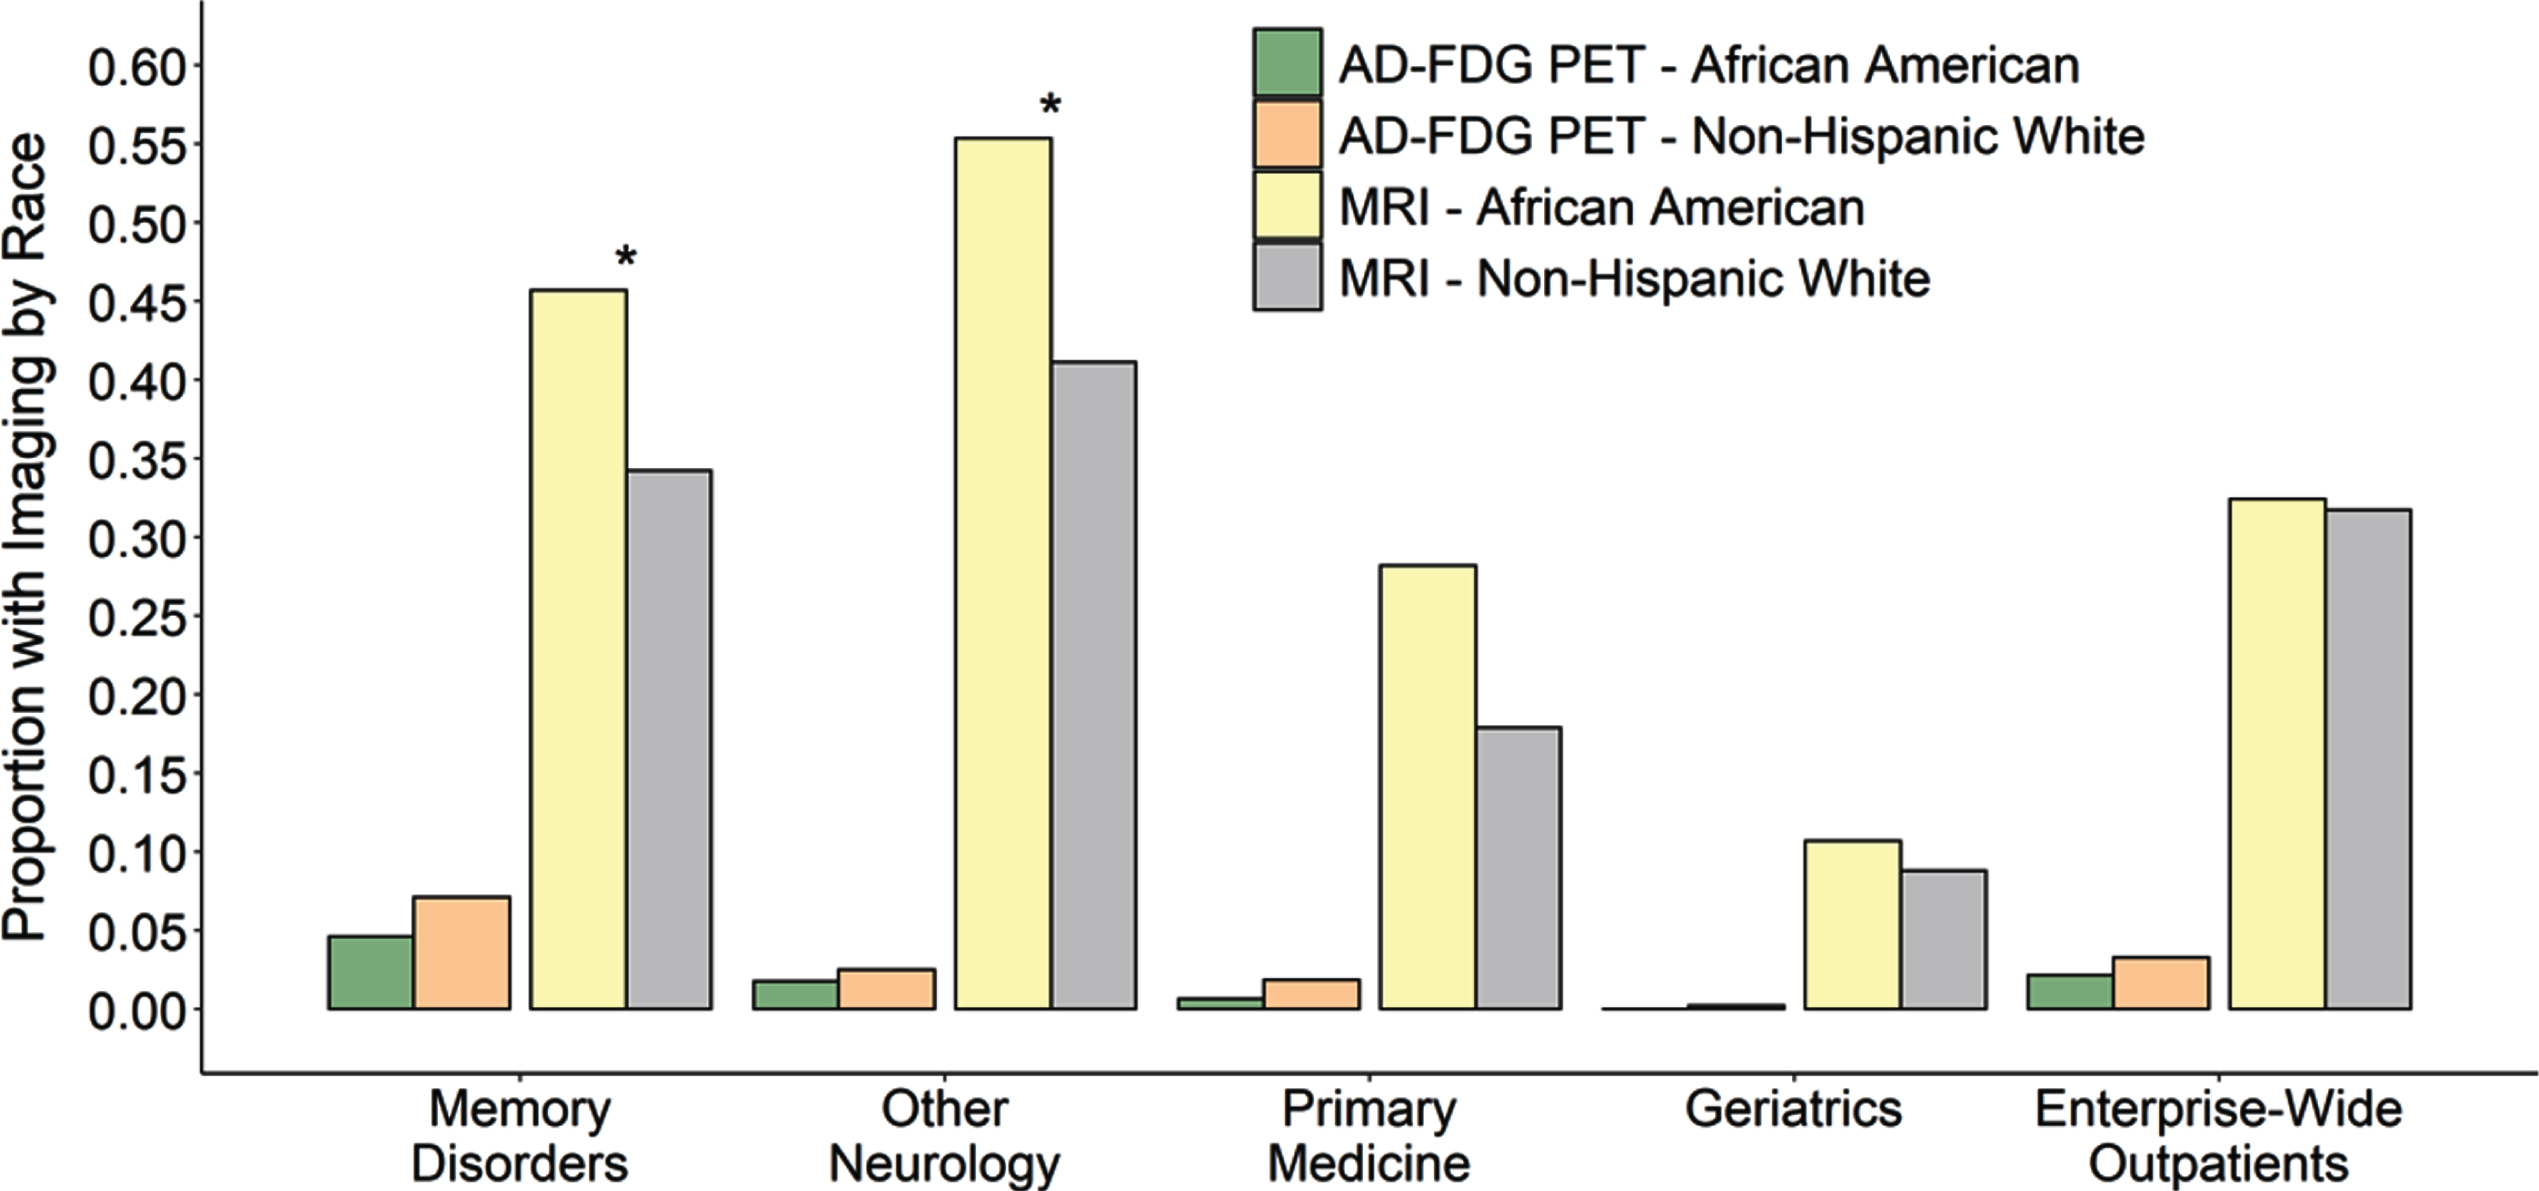 Proportion of AD/MCI outpatients who received AD FDG-PET (left) and brain MRI (right) in each clinical setting subset by race. Regardless of race, outpatients with AD/MCI seen by Memory Disorders or other Neurology clinics were more likely to receive a brain MRI for AD than in the Primary Medicine or Geriatrics clinics or when compared to the entire medical system (all p < 0.0001, p-values not shown on plot). Outpatients seen in Memory Disorders were also more likely to receive AD FDG-PET when compared to any other clinical setting. Within each clinic, there was no difference in the African American proportion of AD/MCI patients who received FDG-PET and non-Hispanic white patients. This was also no difference when evaluating racial differences in brain MRI for the Primary Medicine or Geriatrics or when considering all AD/MCI outpatients across the entire medical system. However, African American outpatients with AD/MCI were much more likely to receive a brain MRI for AD within the Memory Disorders clinic or other Neurology clinics compared to non-Hispanic white AD/MCI outpatients (p = 0.0078 and p = 0.0054 respectively). This is hypothesized to reflect that fewer African Americans had outside imaging prior to their visits with the specialty providers.